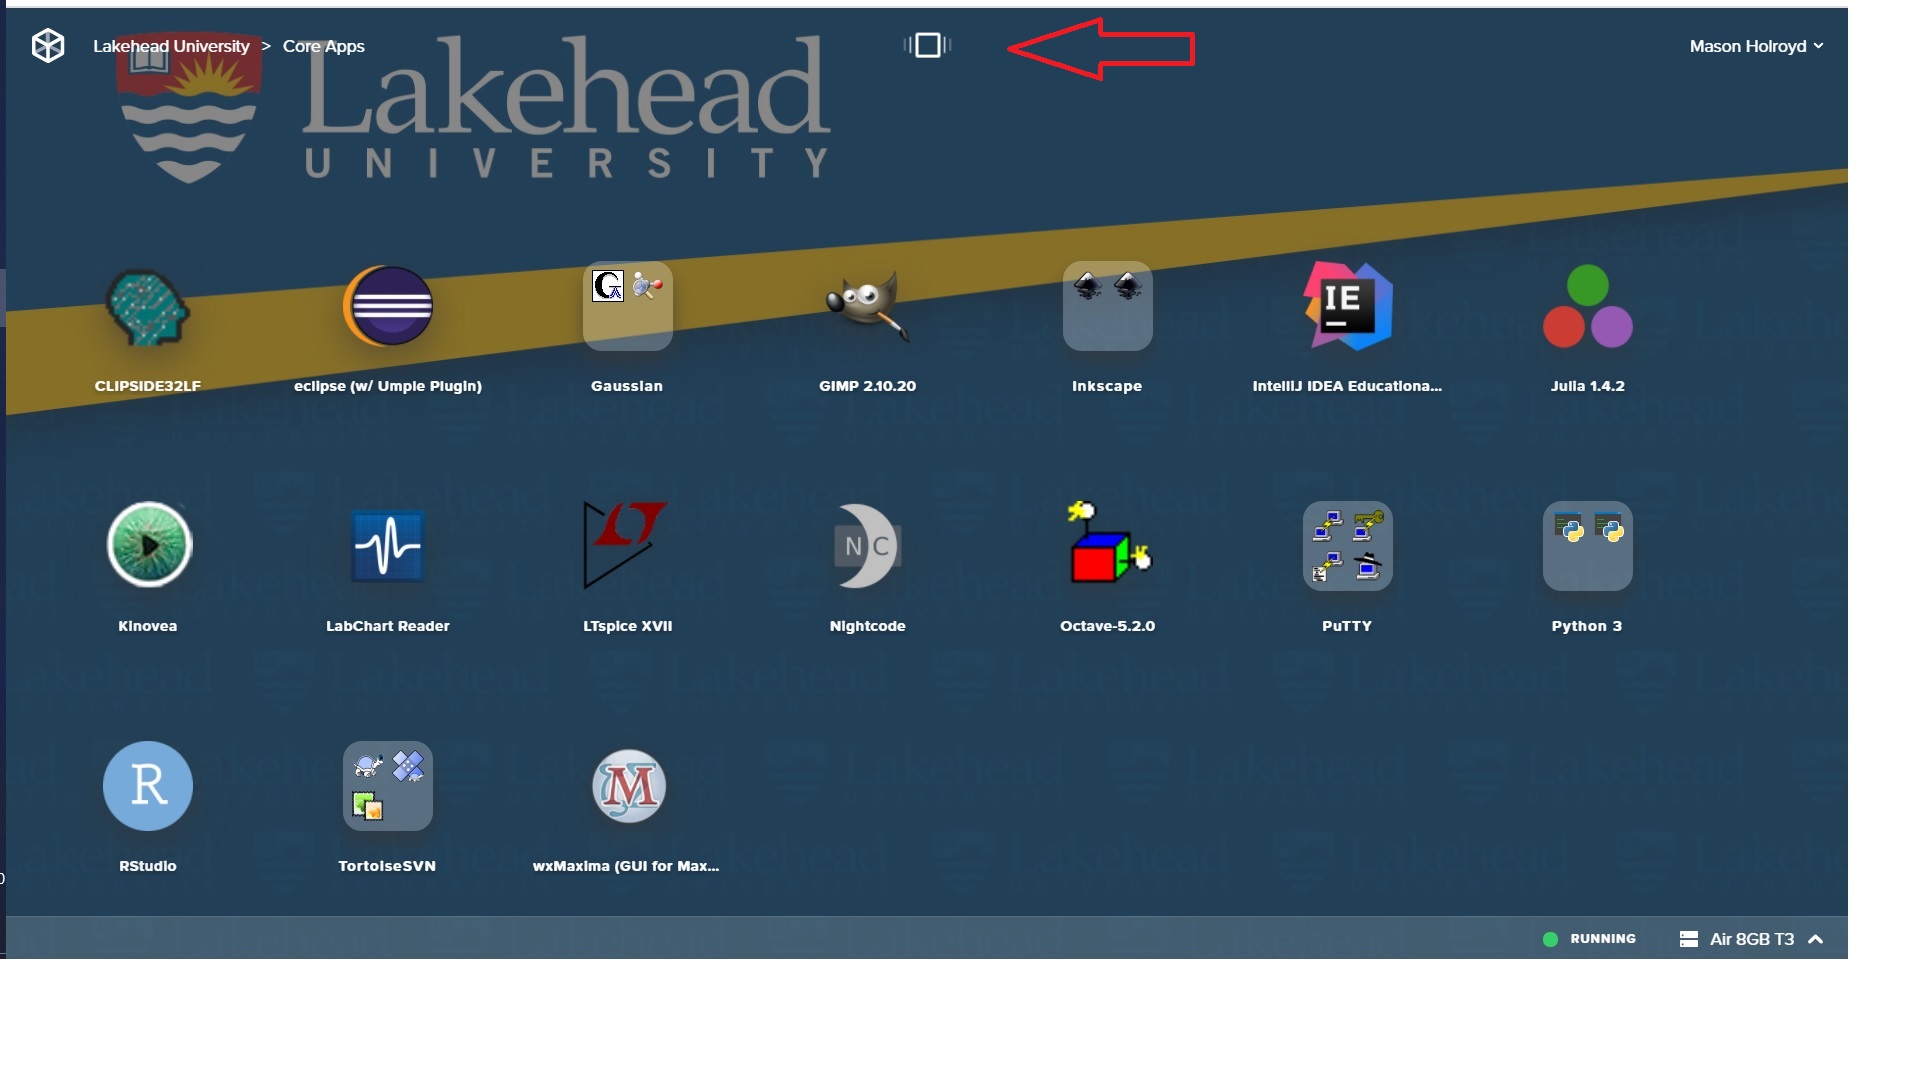 screenshot of the homepage with the launchpad icon pointed out using a red arrow